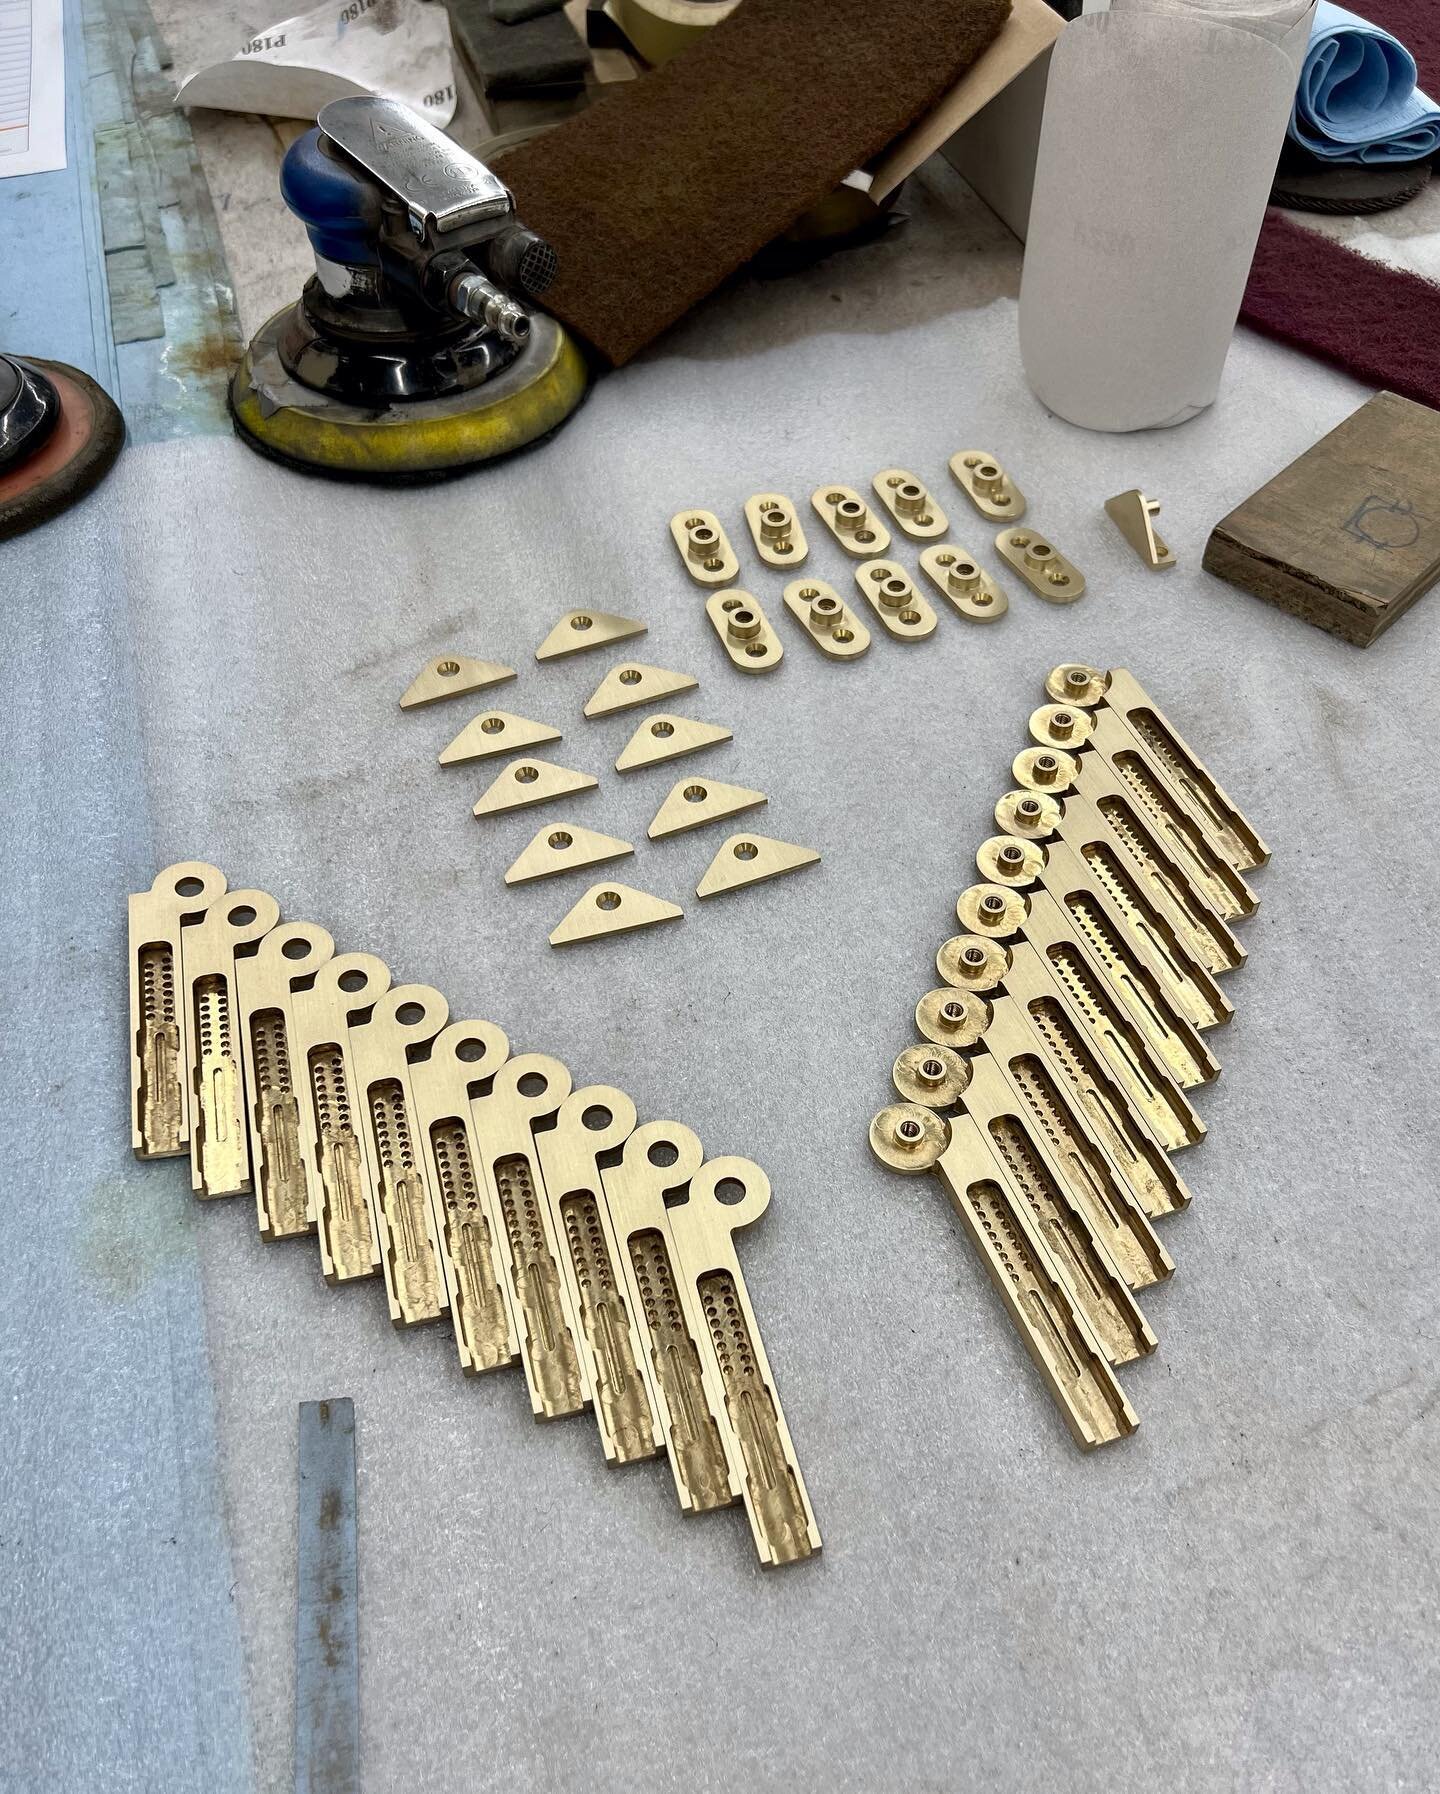 Custom brass door limiter parts ready for plating. A cool thing about them is that they&rsquo;re fully adjustable!

#brasshardware #doorhardware #cncmachine #cncmachines #cncmachining #cncmachiningparts #brassmetal #custommetal #customfabrication #cu